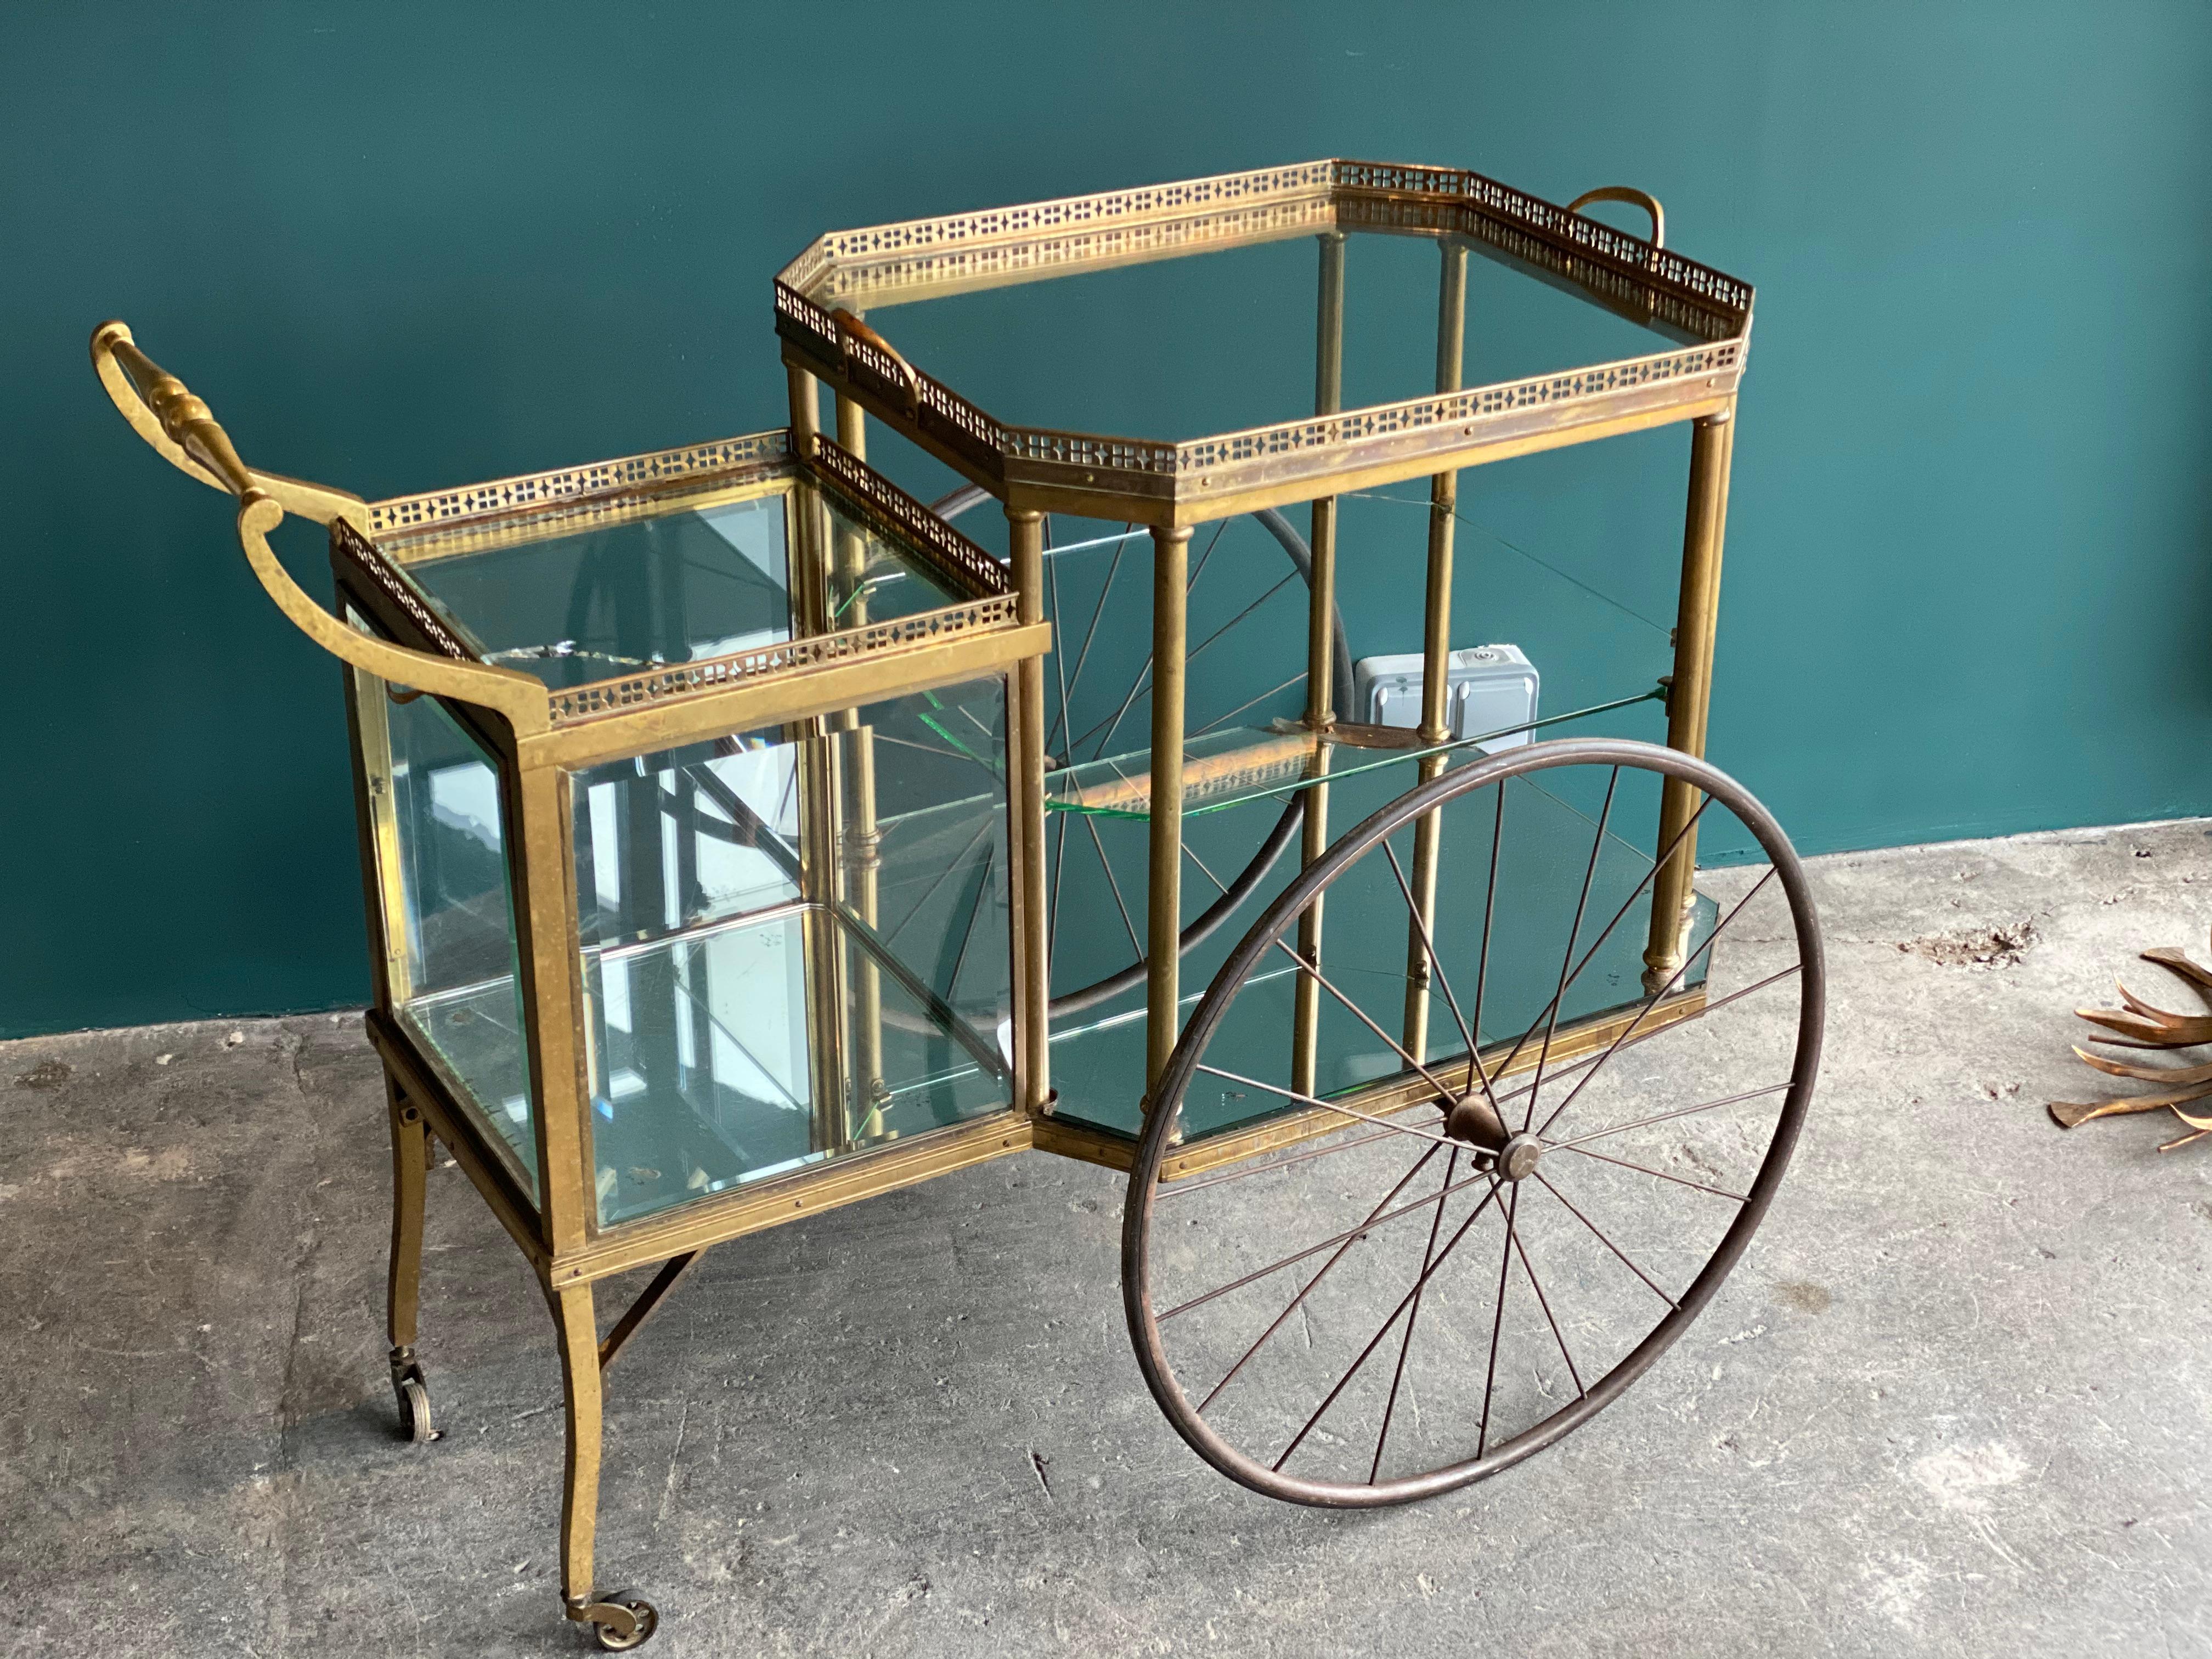 This very unusual bar carriage is from the end of the 19th century and comes from a castle. The smart and special thing about this tea trolley is not only its appearance but also its multifunctionality. The upper part of the trolley can easily be